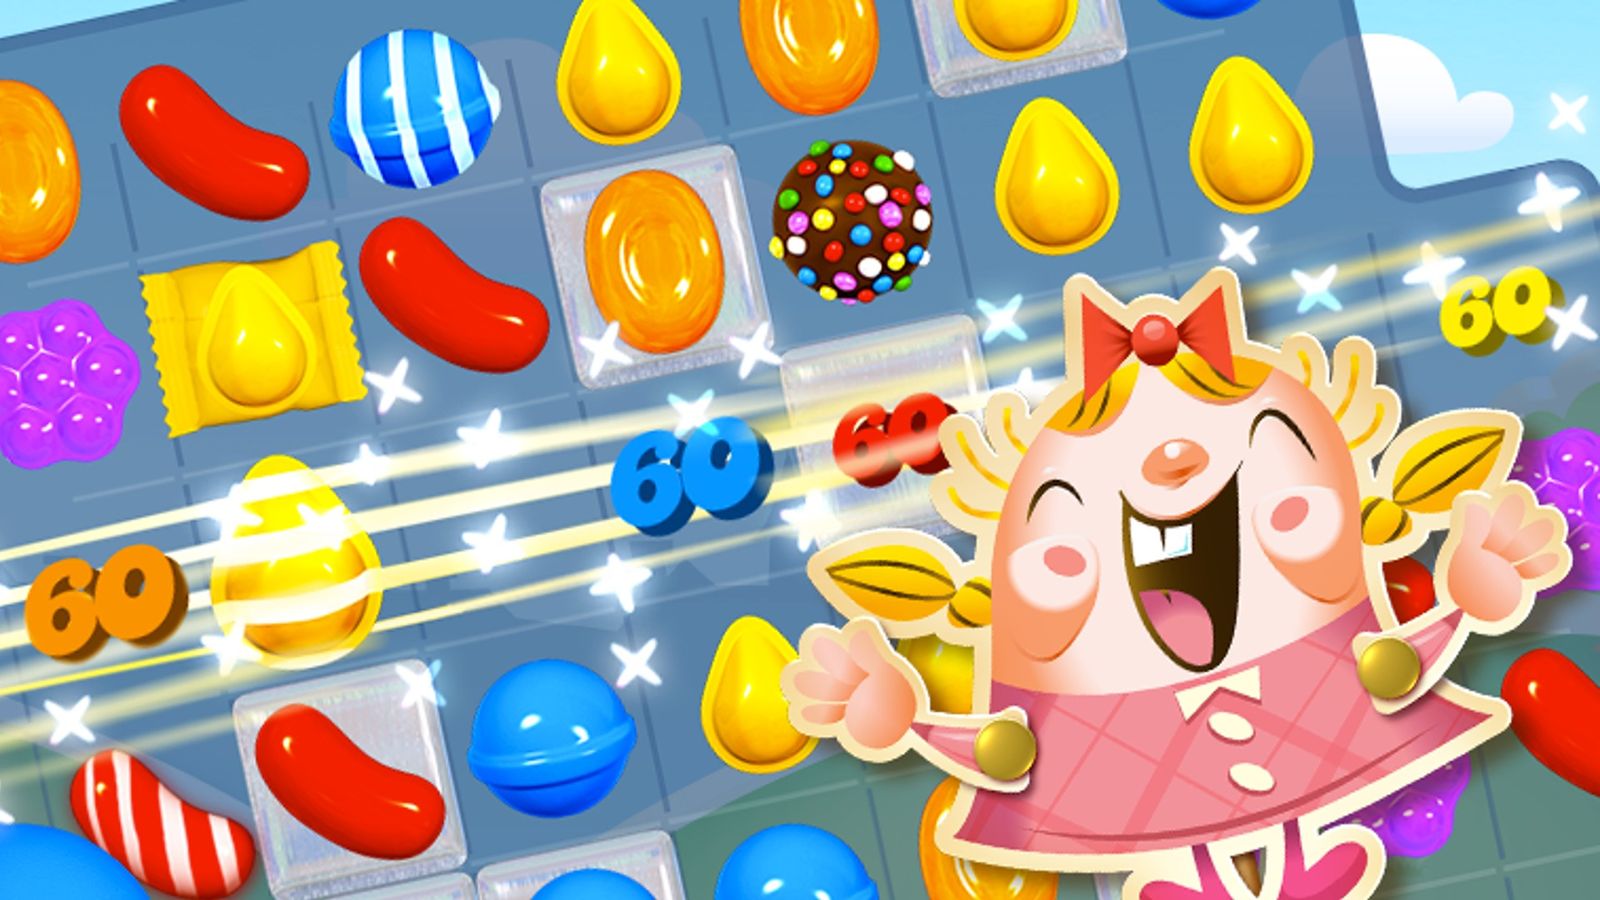 Image of a grid puzzle in progress in Candy Crush Saga.